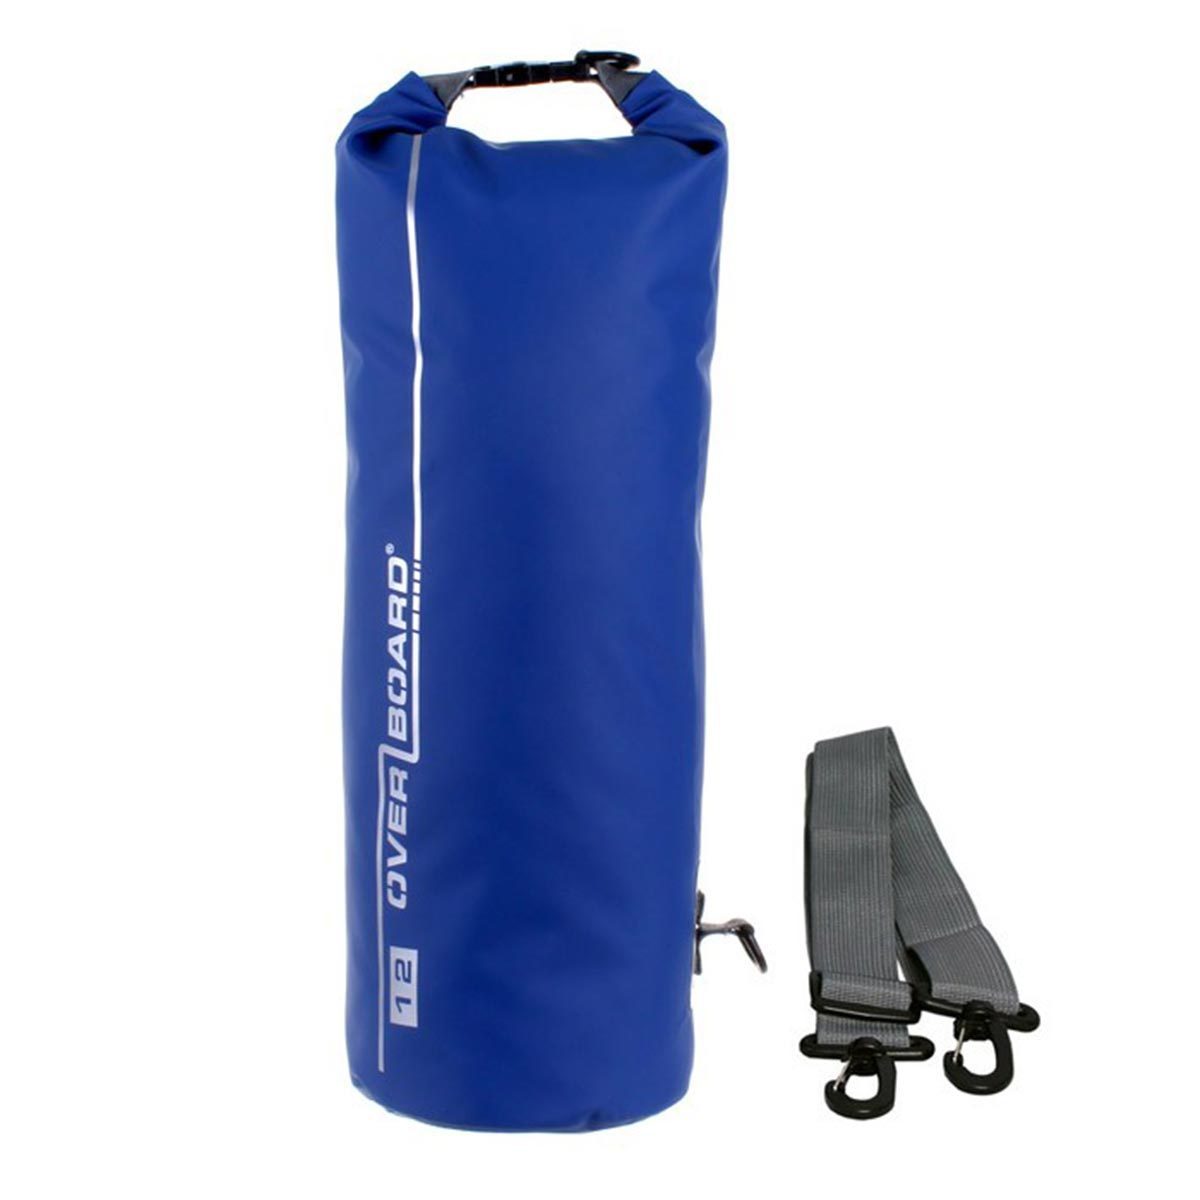 Overboard 12 Litre Dry Tube Bag Bags, Packs and Cases Overboard Blue Tactical Gear Supplier Tactical Distributors Australia